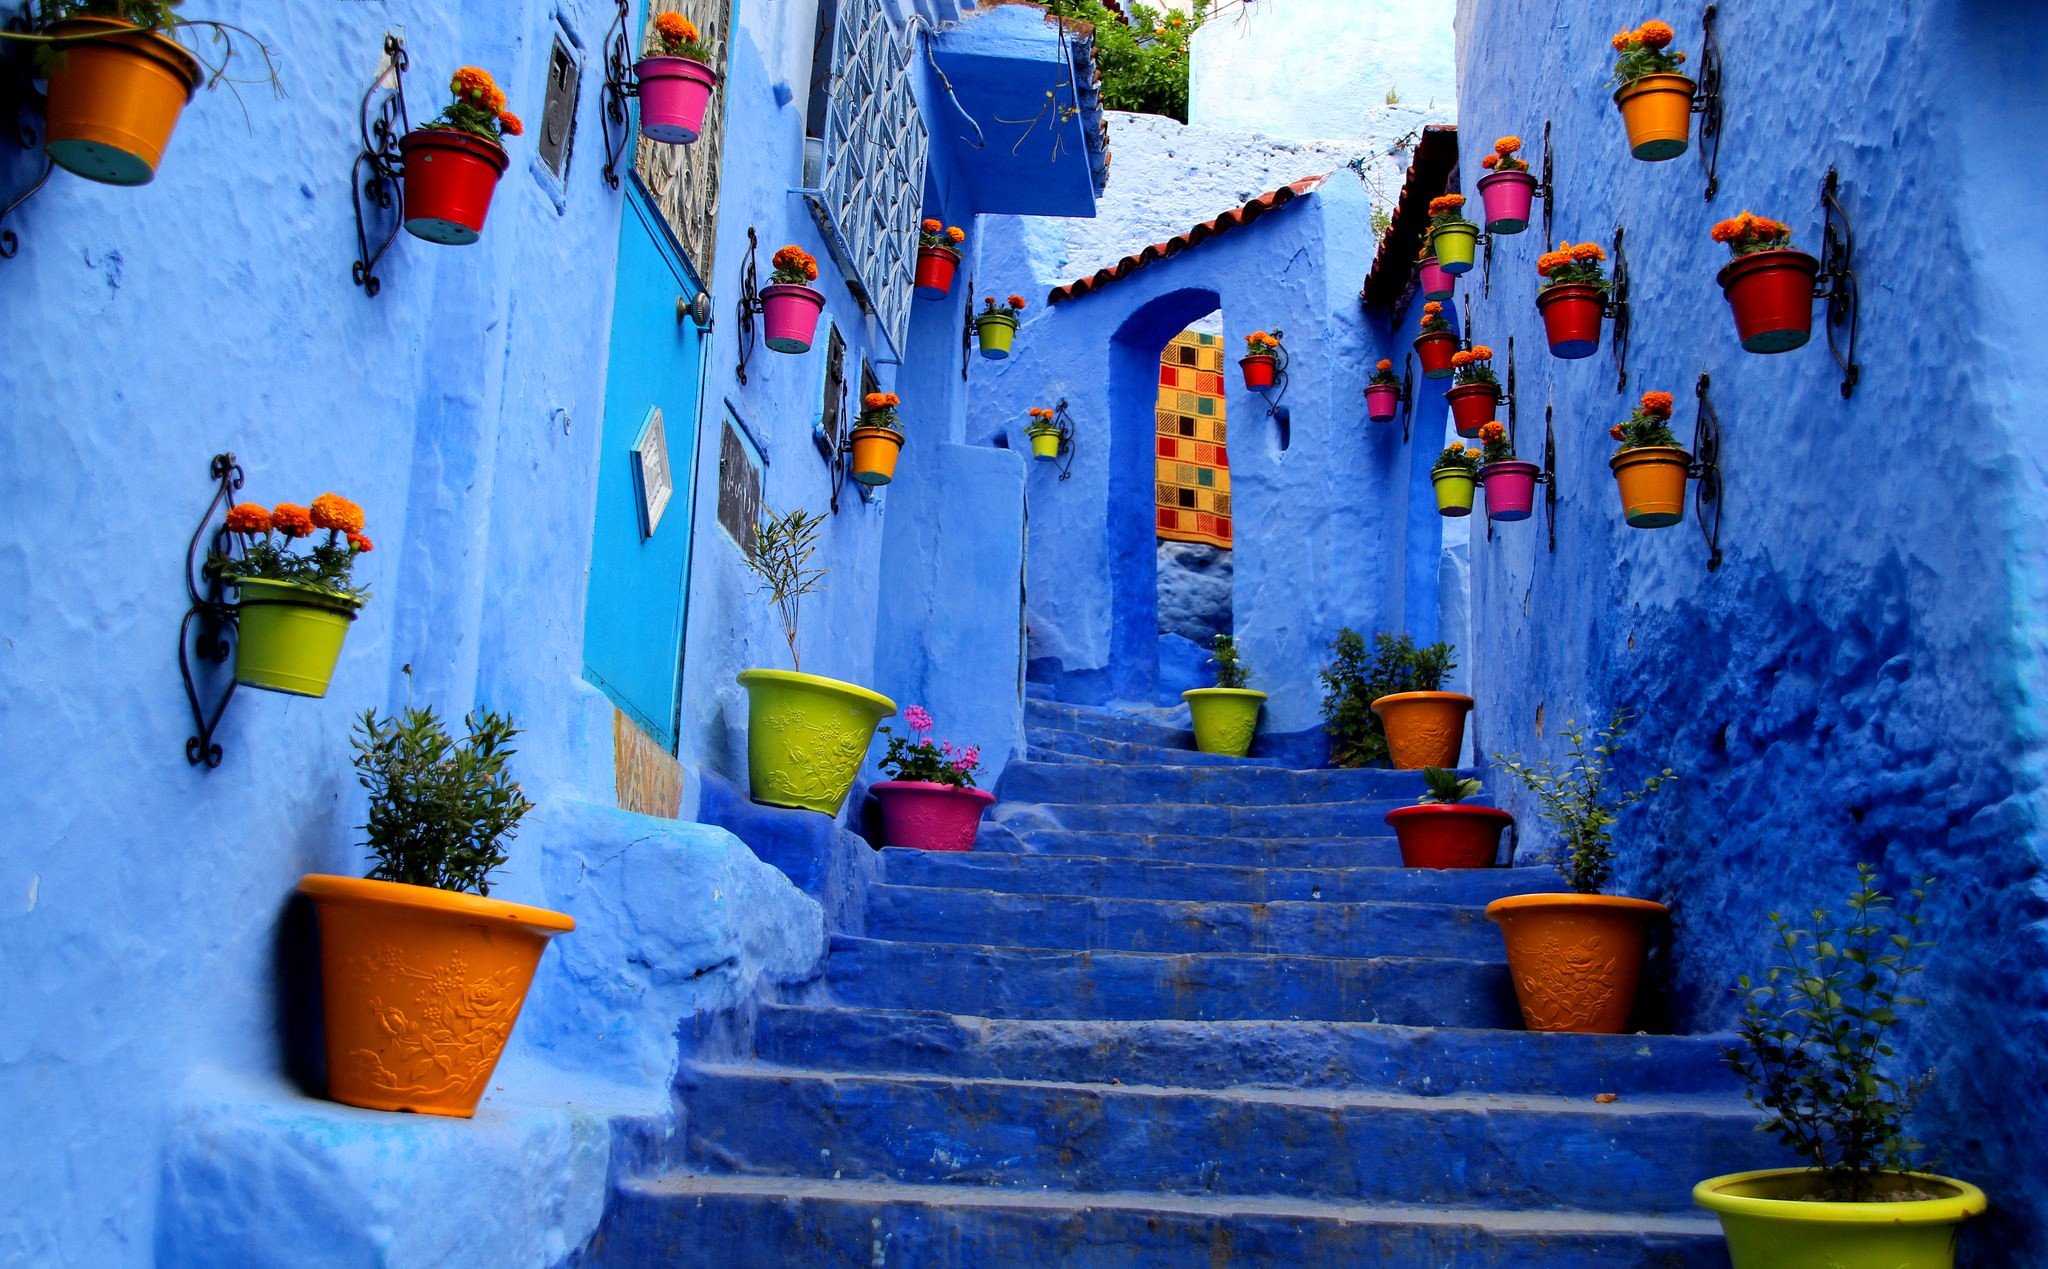 man made, stairs, blue, colorful, colors, flower, pot plant